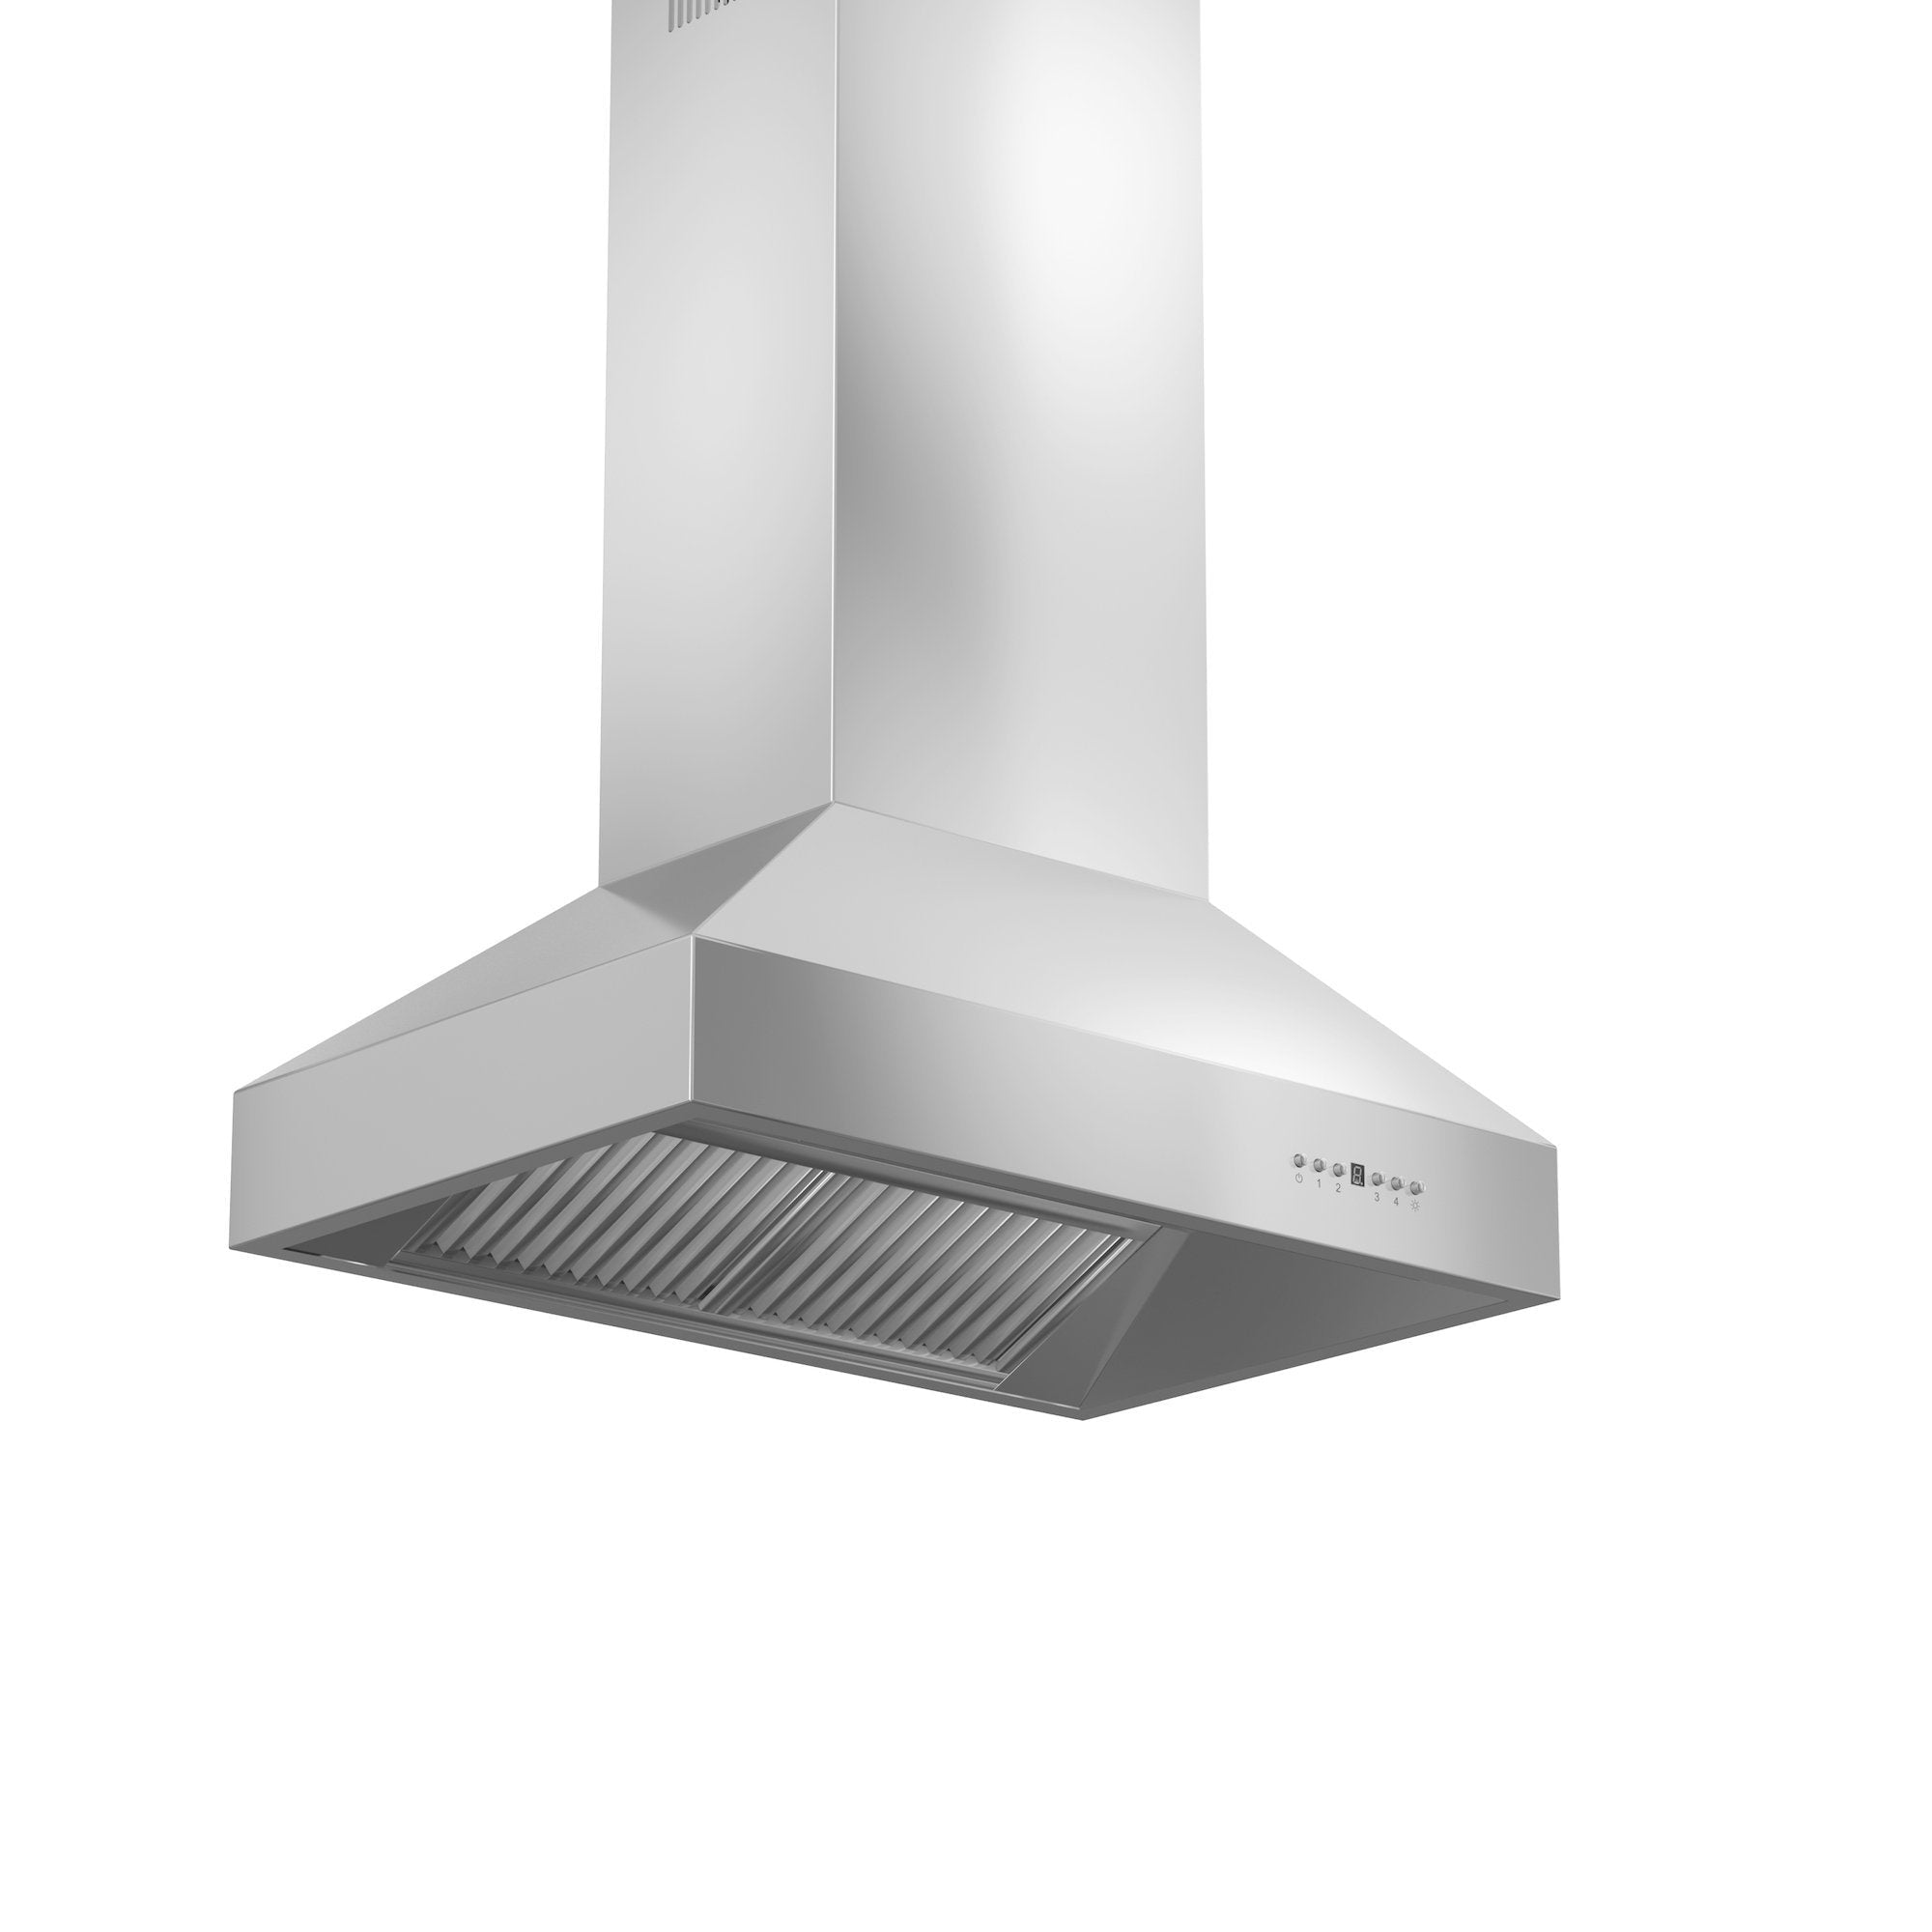 ZLINE 48" Ducted Island Mount Range Hood in Outdoor Approved Stainless Steel (697i-304-48)